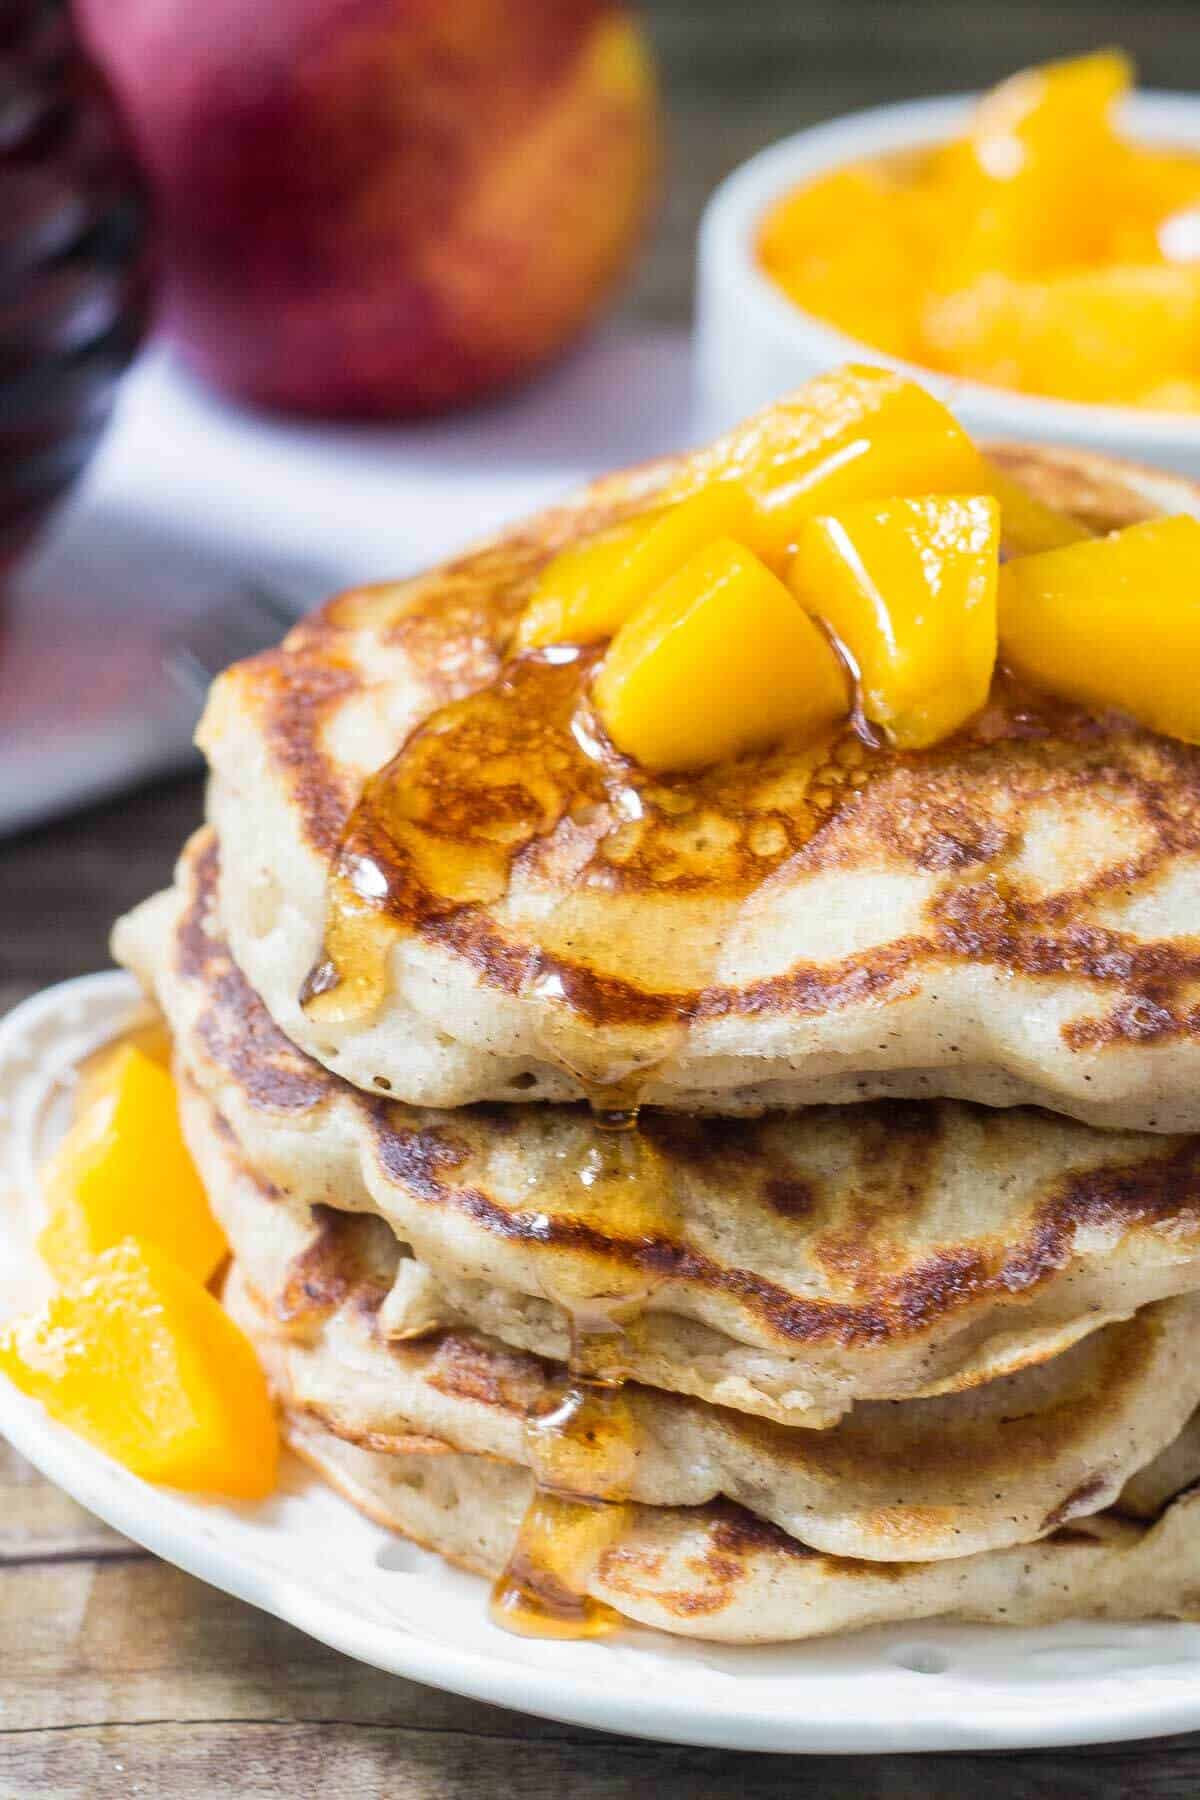 Stack of brown sugar peach pancakes drizzled with syrup and topped with chopped peaches. Jar of syrup of bowl of chopped peaches in the background.